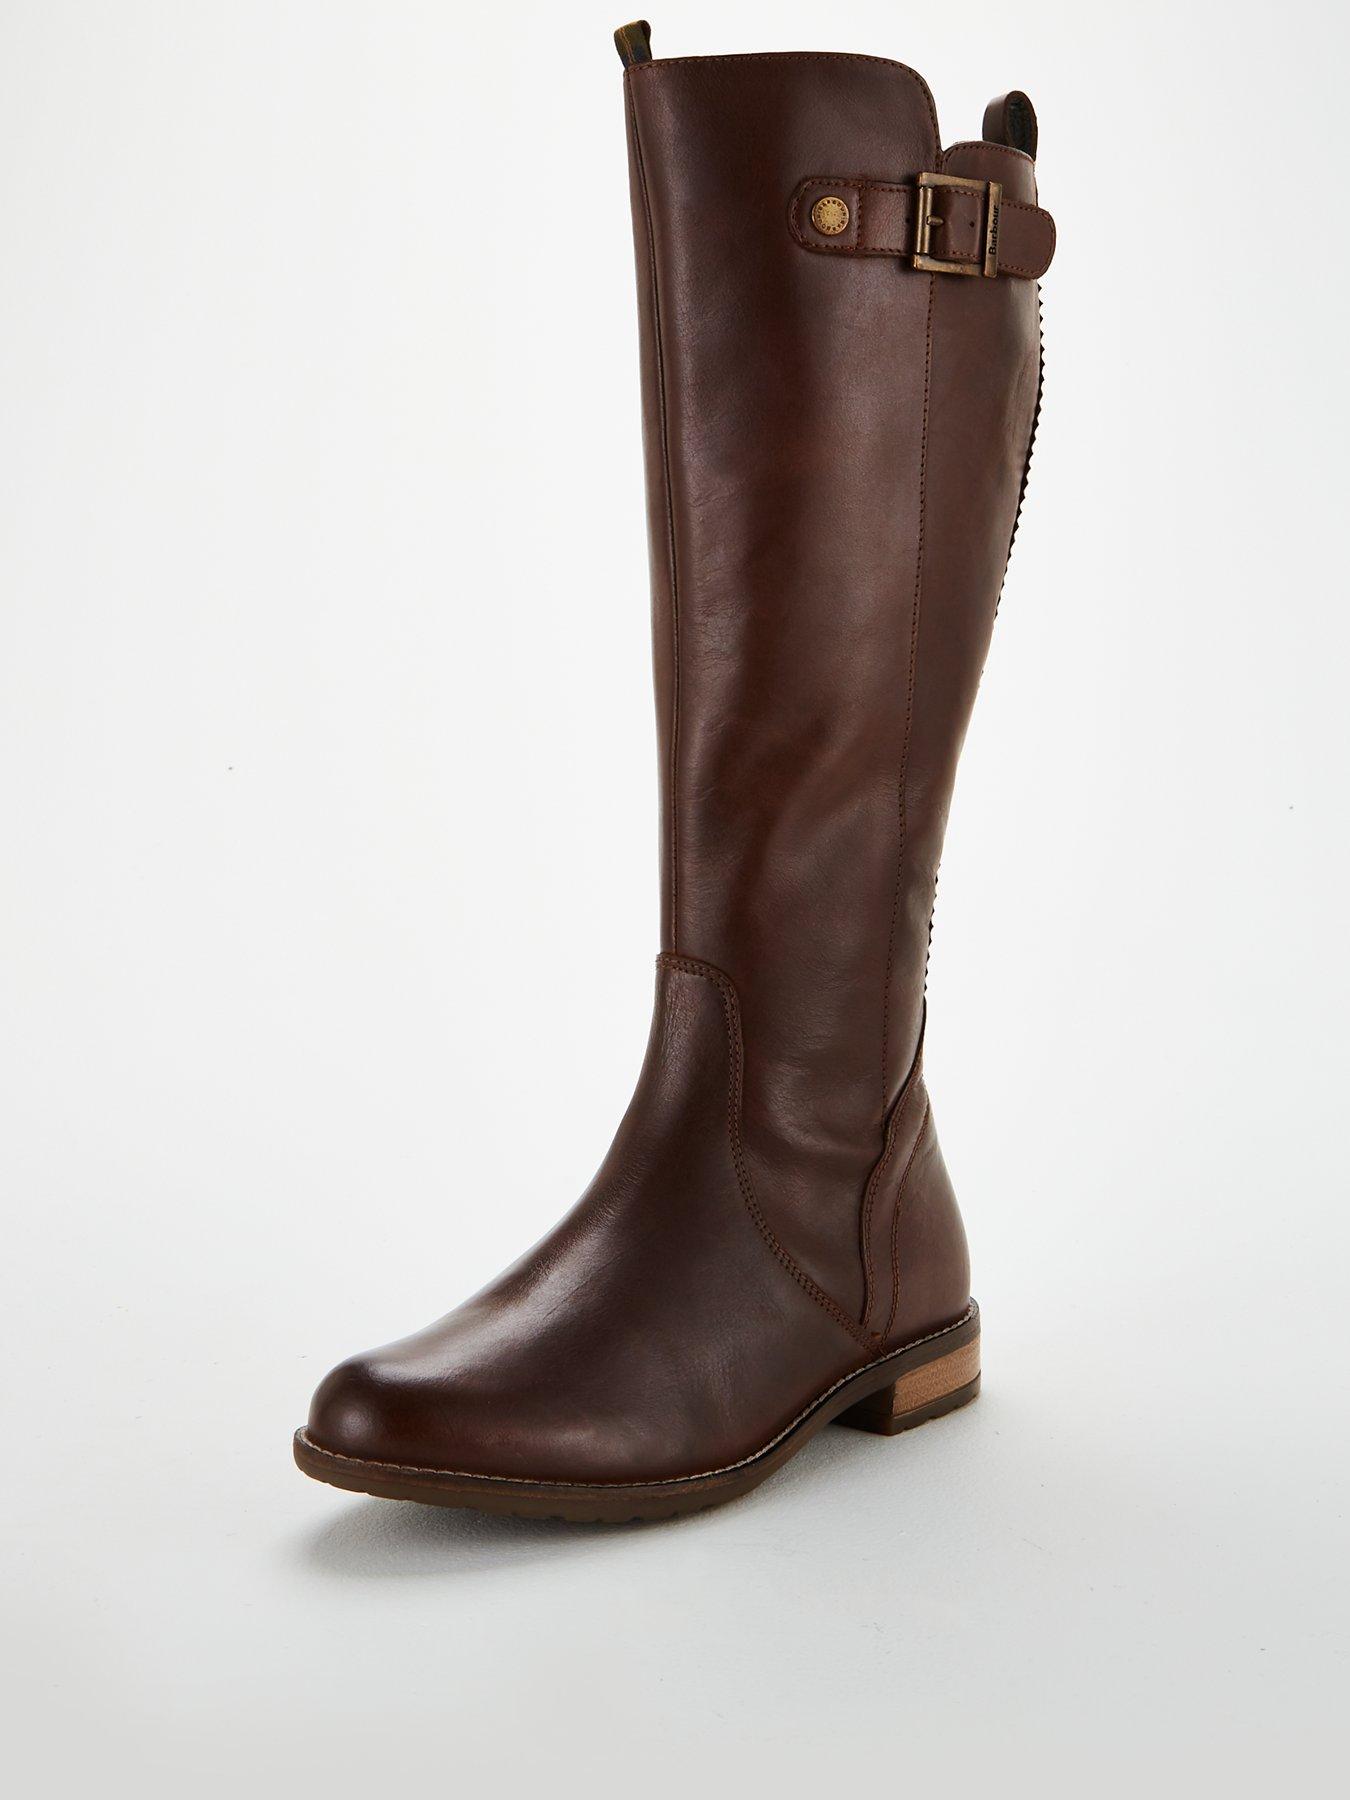 barbour rebecca boots brown